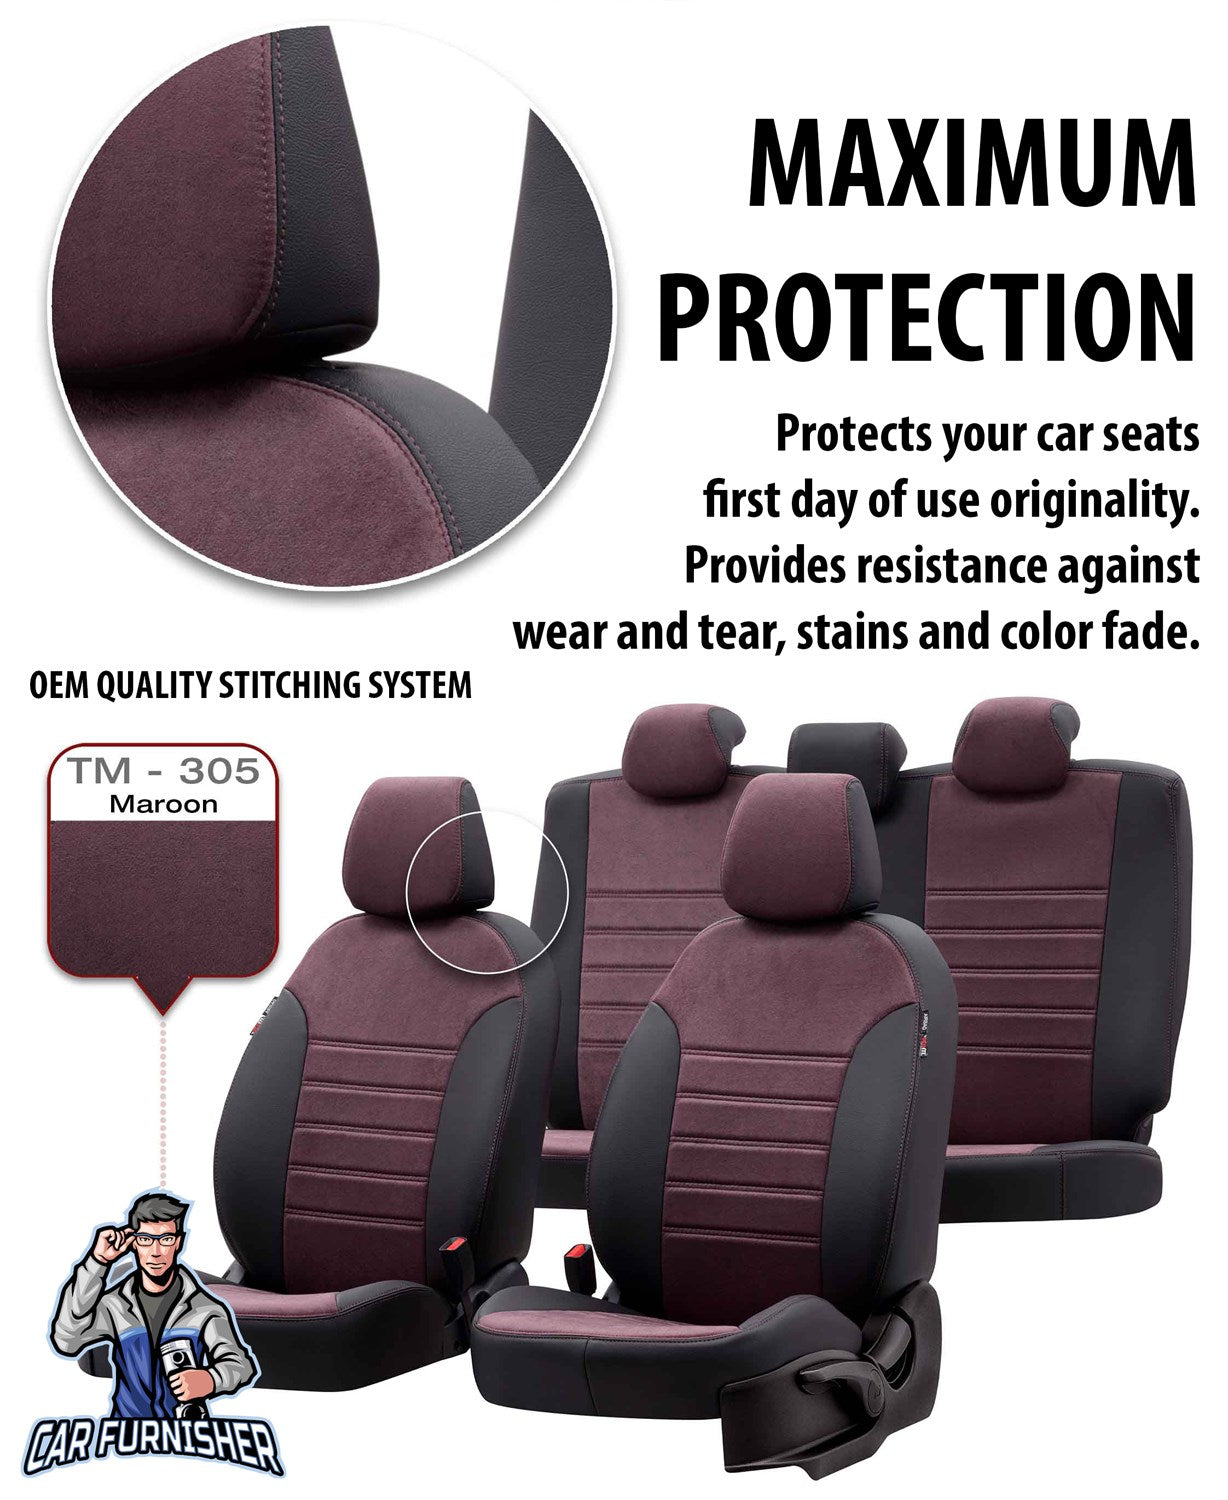 Proton Gen-2 Seat Covers Milano Suede Design Smoked Black Leather & Suede Fabric